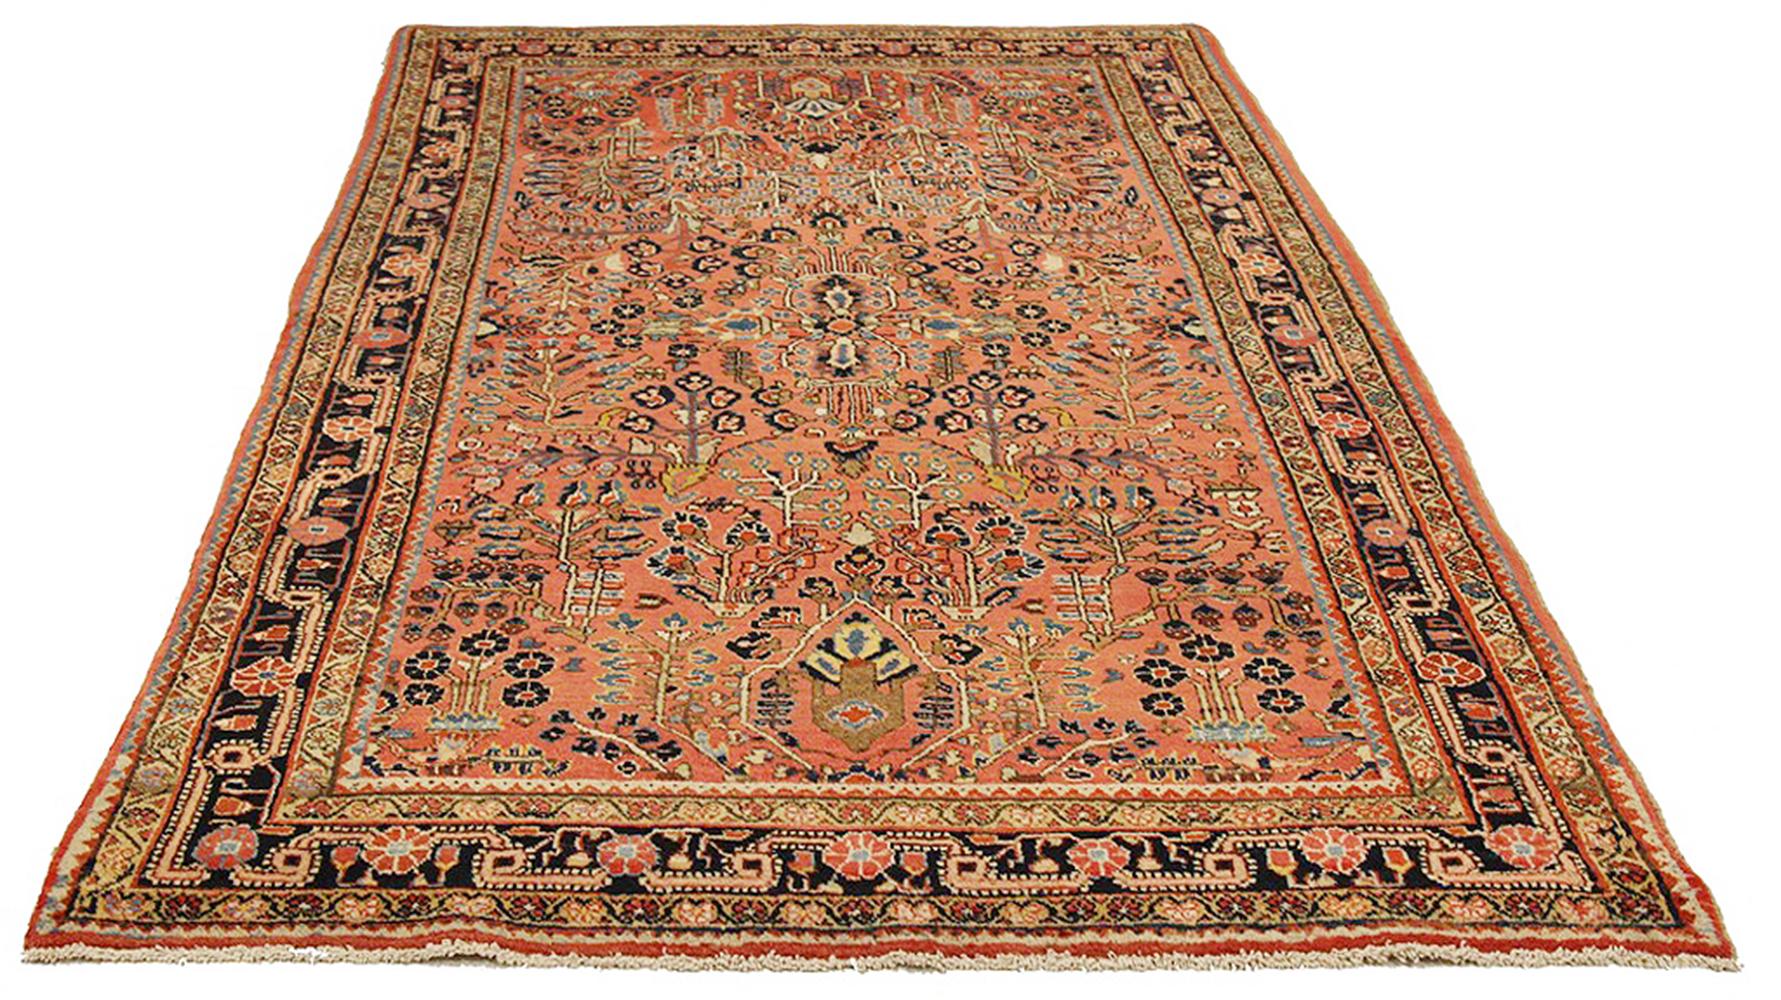 Antique Persian rug handwoven from the finest sheep’s wool and colored with all-natural vegetable dyes that are safe for humans and pets. It’s a traditional Sarouk design featuring flower details using a lovely mix of blue, navy, red and ivory. It